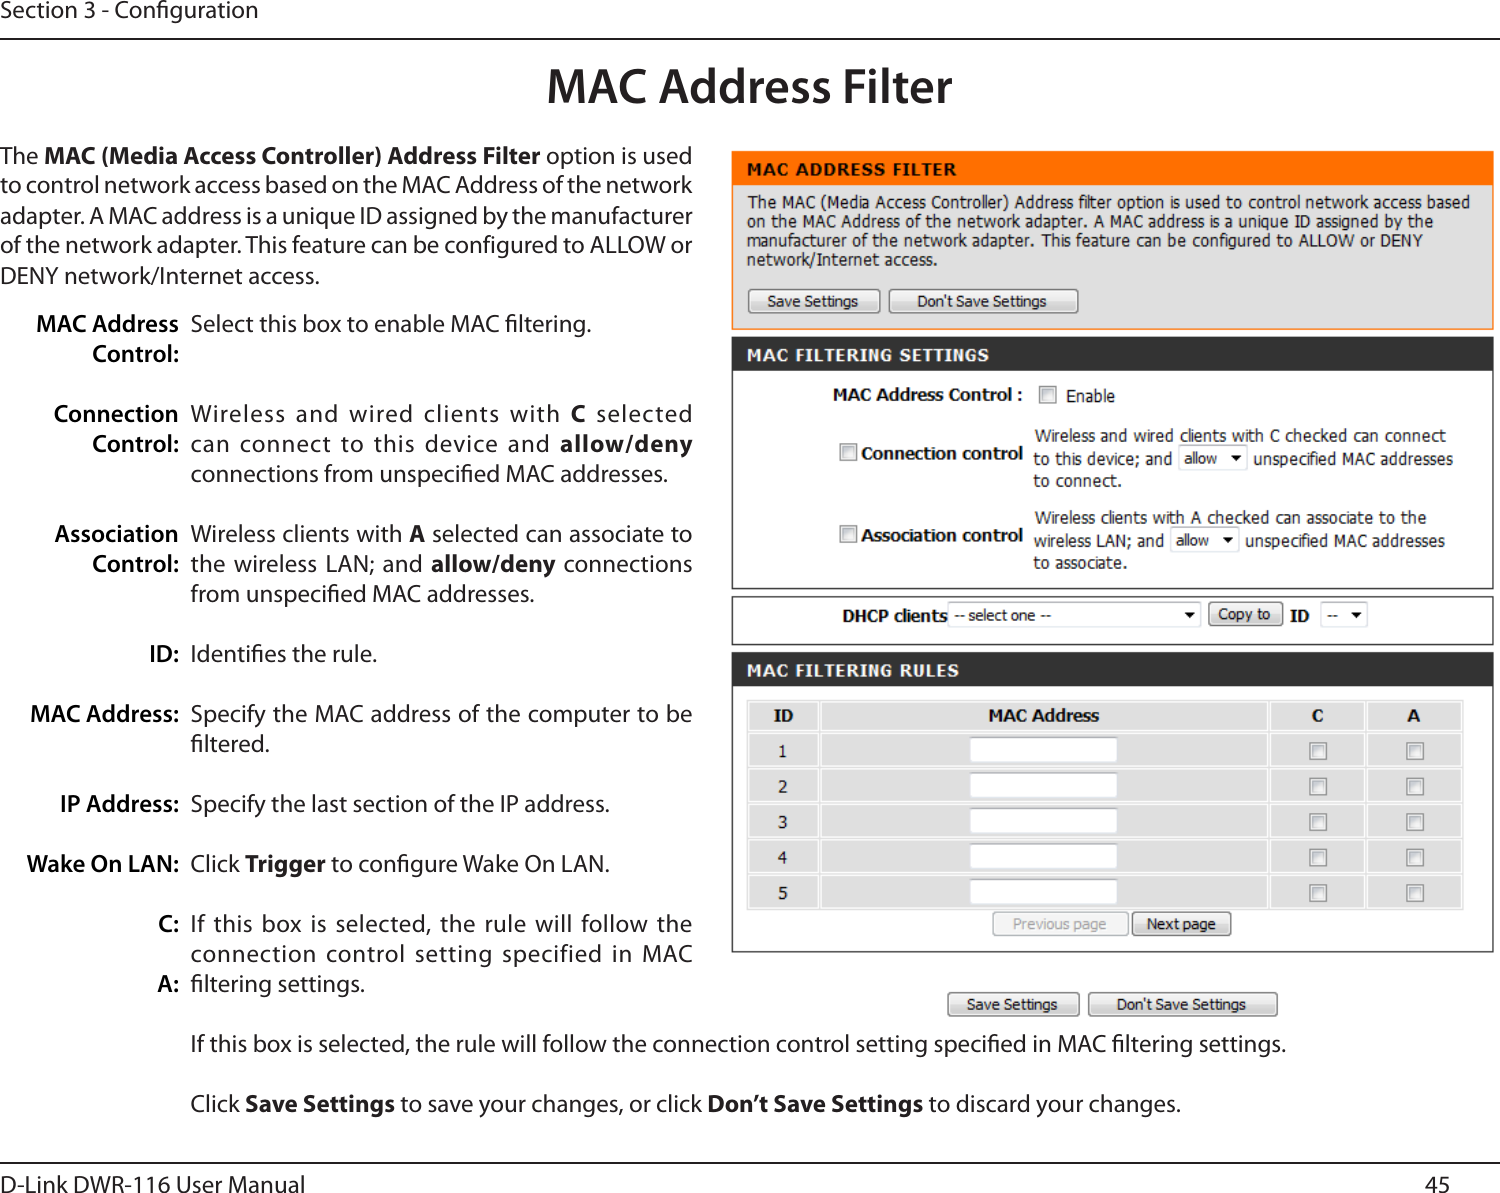 45D-Link DWR-116 User ManualSection 3 - CongurationMAC Address FilterSelect this box to enable MAC ltering.Wireless and wired clients with  C  selected can connect to this  device and allow/deny connections from unspecied MAC addresses.Wireless clients with A selected can associate to the wireless LAN;  and allow/deny connections from unspecied MAC addresses.Identies the rule.Specify the MAC address of the computer to be ltered.Specify the last section of the IP address.Click Trigger to congure Wake On LAN.If this box is selected, the rule  will follow the connection control setting  specified in MAC ltering settings.If this box is selected, the rule will follow the connection control setting specied in MAC ltering settings.Click Save Settings to save your changes, or click Don’t Save Settings to discard your changes.MAC Address Control:Connection Control:Association Control:ID:MAC Address:IP Address:Wake On LAN:C:A:The MAC (Media Access Controller) Address Filter option is used to control network access based on the MAC Address of the network adapter. A MAC address is a unique ID assigned by the manufacturer of the network adapter. This feature can be configured to ALLOW or DENY network/Internet access.